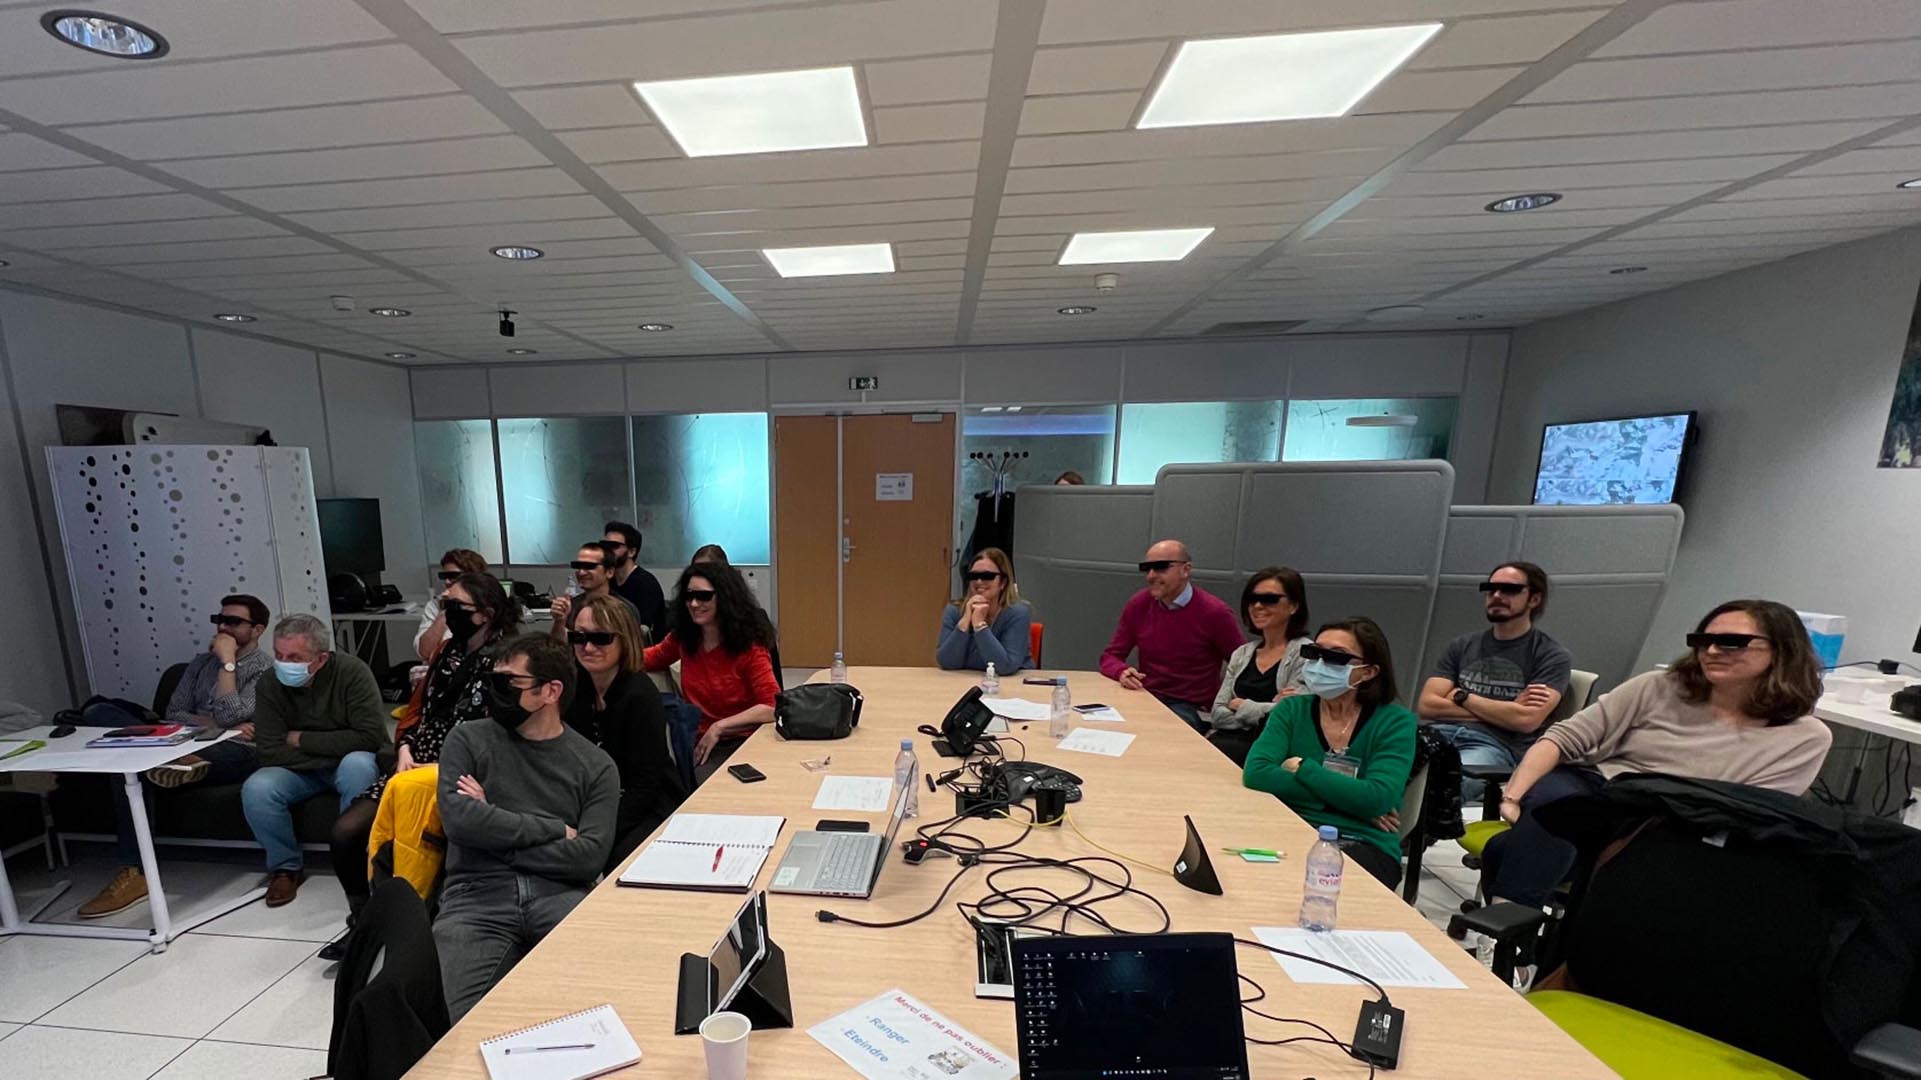 In person at CNES Toulouse, the teachers benefited from a 3D satellite imaging demonstration. Equipped with active glasses, they were able to admire striking Pleiades stereoscopic images of major cities, natural landscapes, the pyramids and even the Moon.